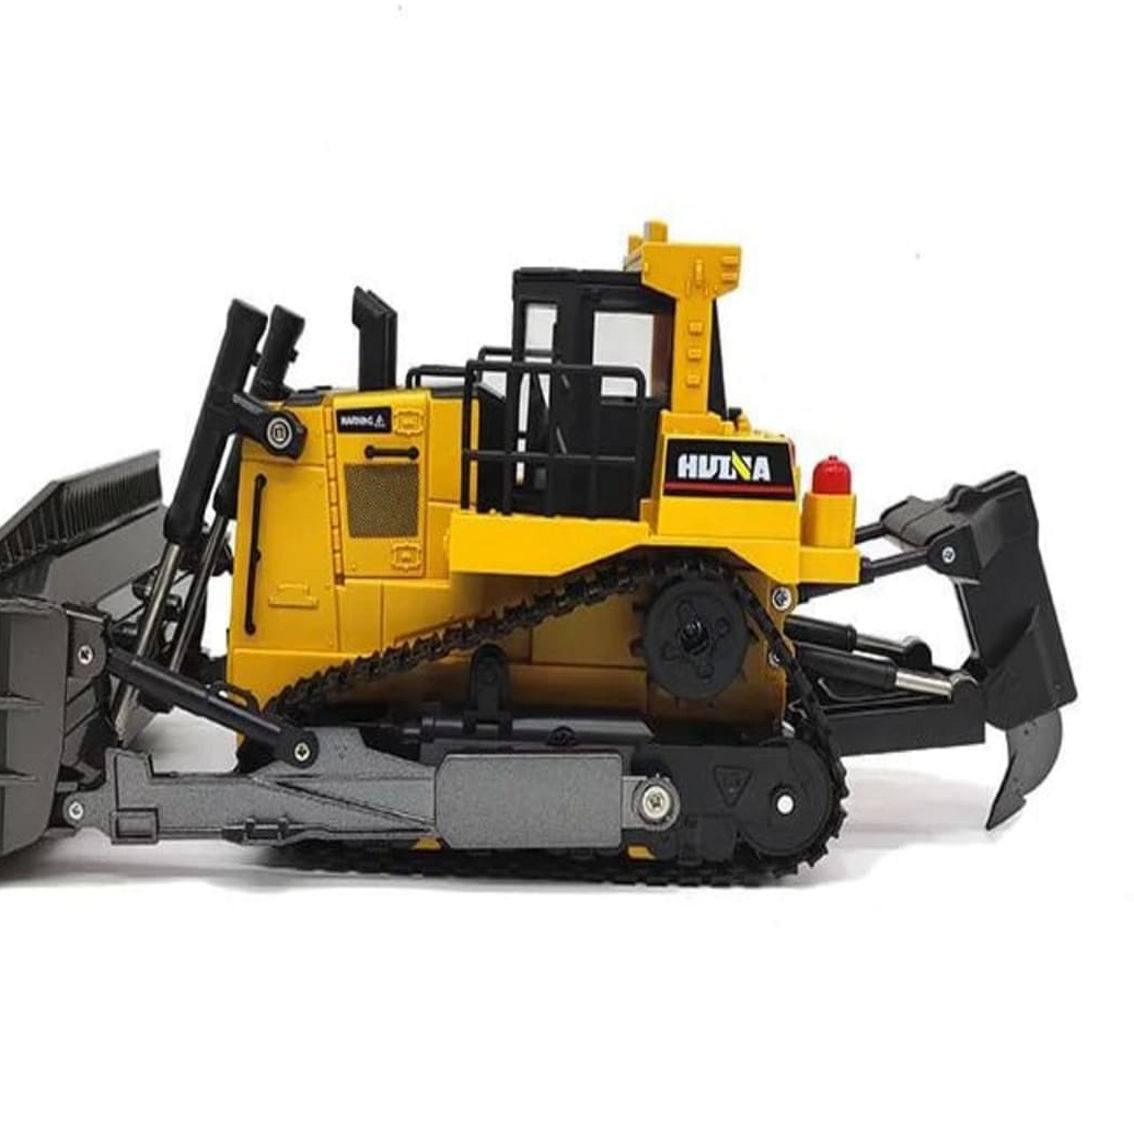 CIS-1569 1:16 scale 11 Ch Bulldozer with 2.4 GHz remote and rechargeable batteries - Image 2 of 5